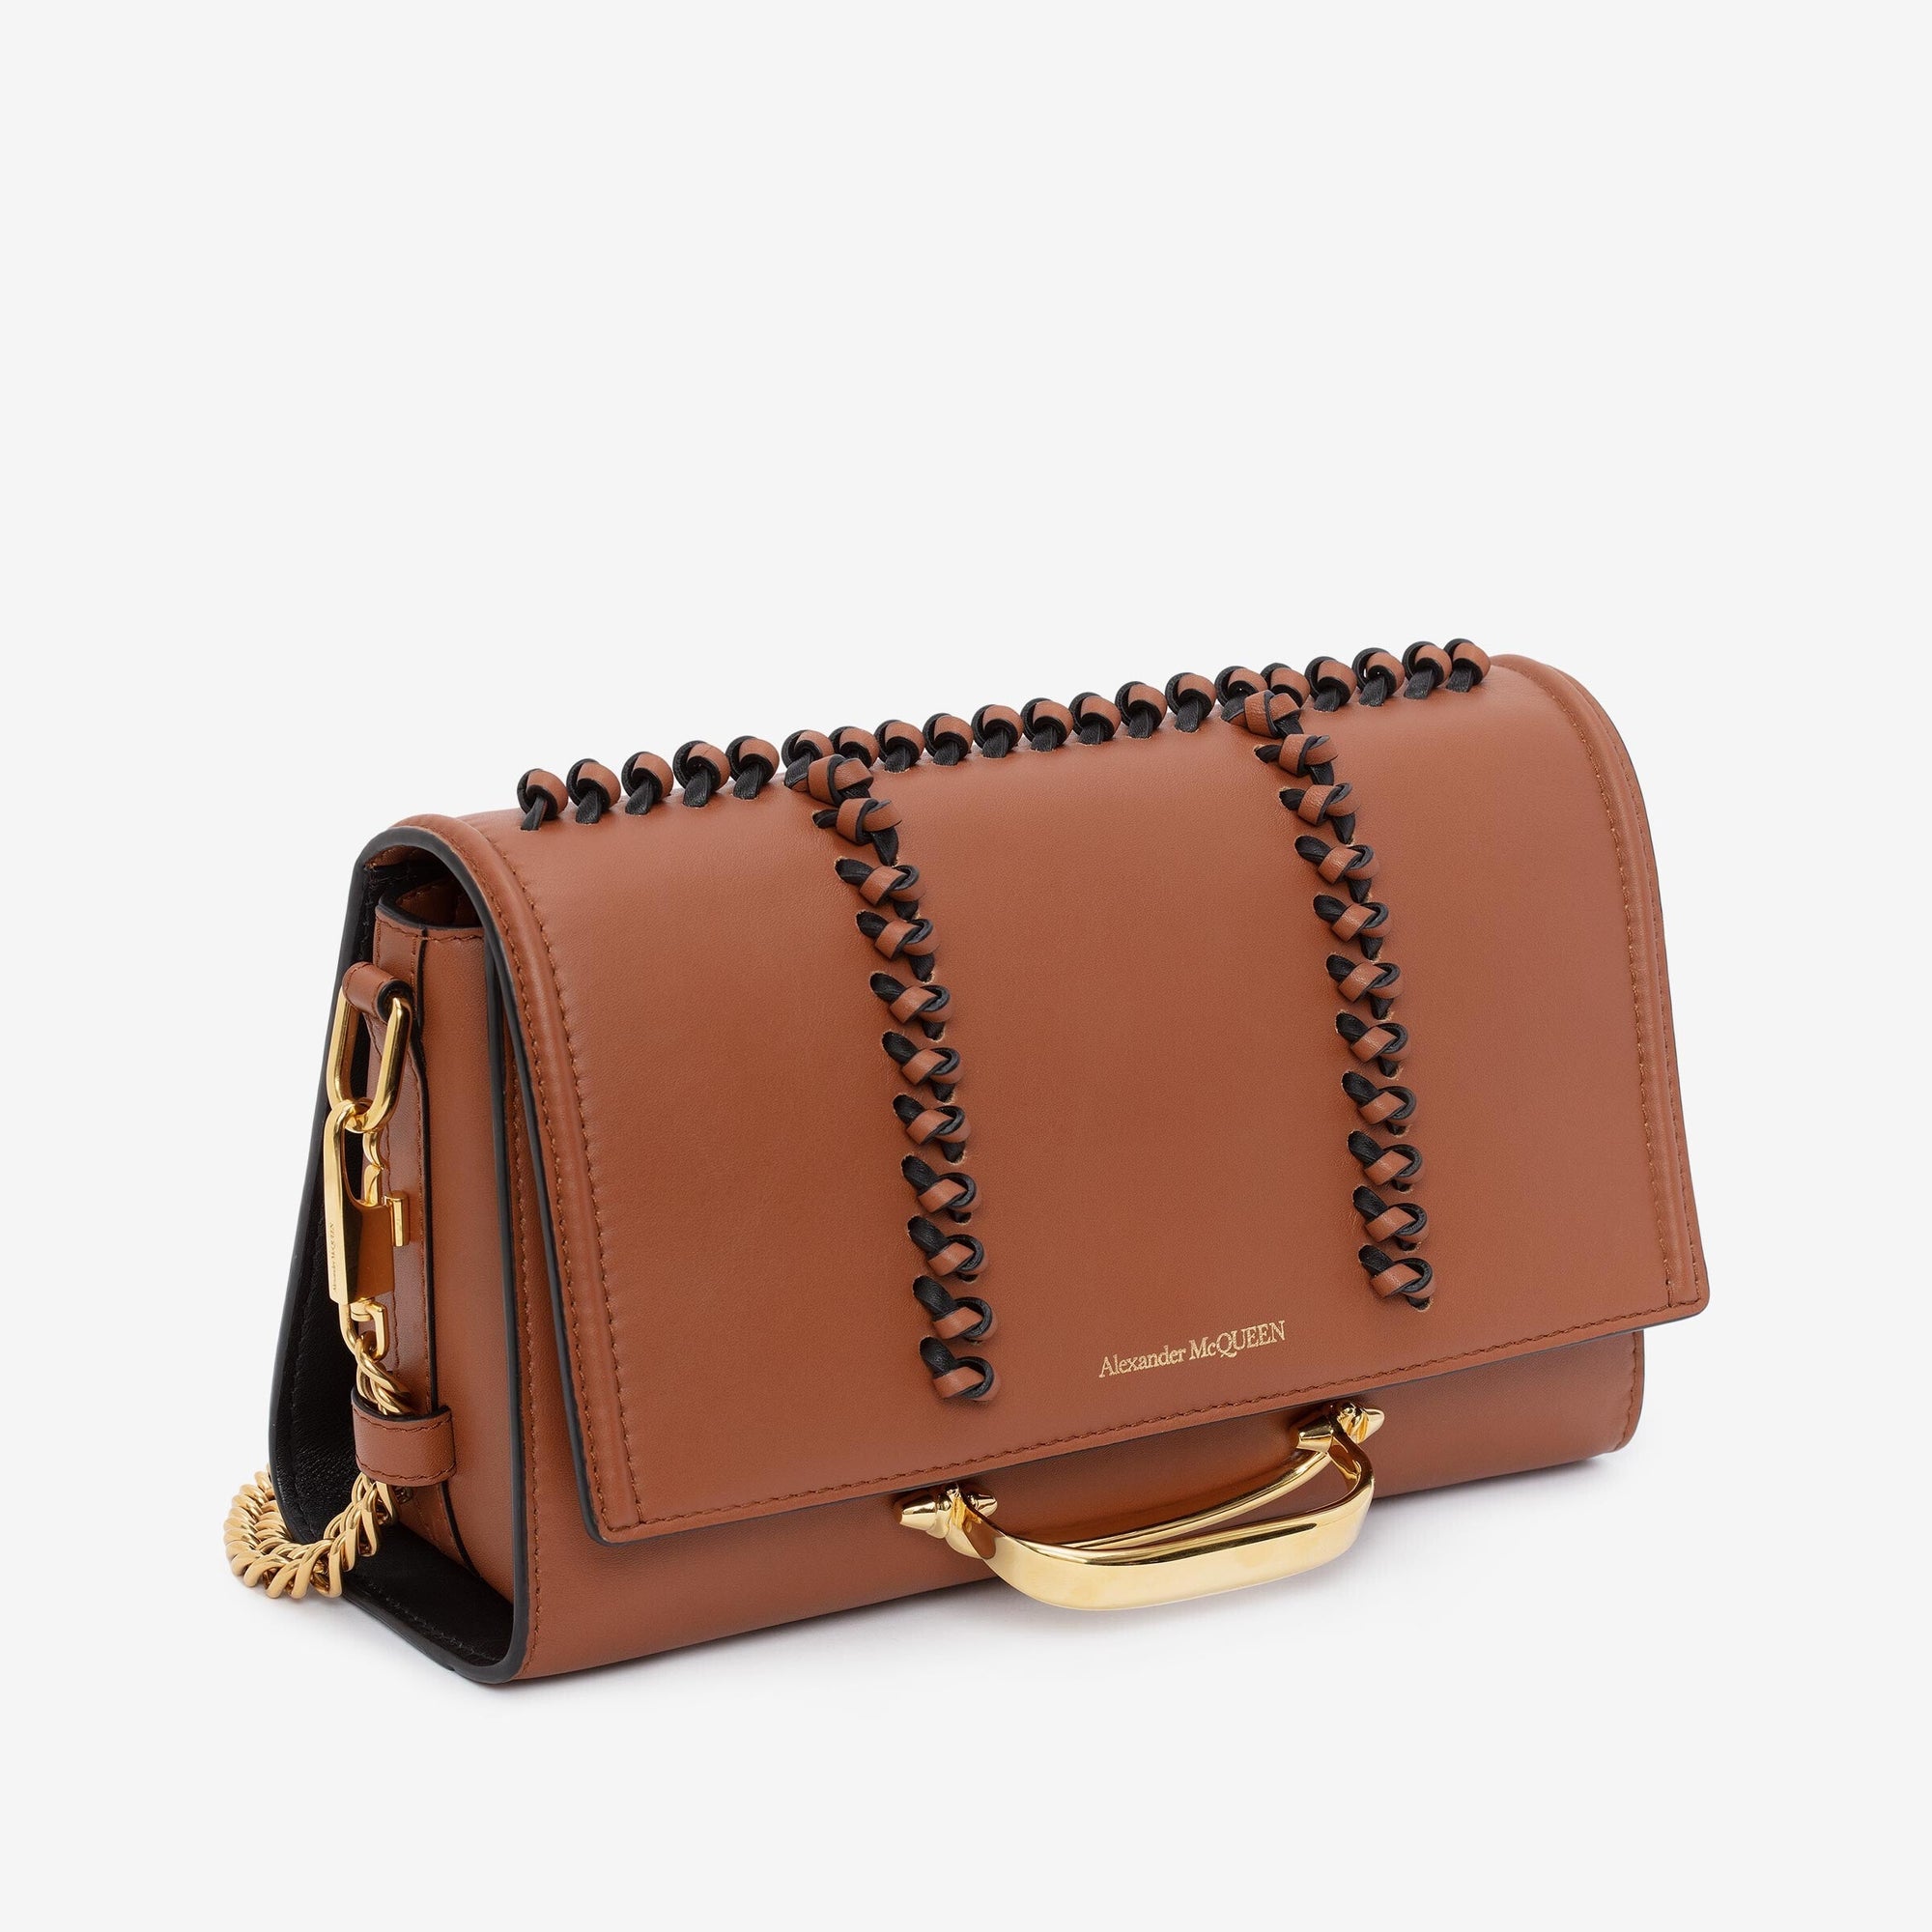 Alexander McQueen The Story Knotted Brown Handbag 631472 at_Queen_Bee_of_Beverly_Hills